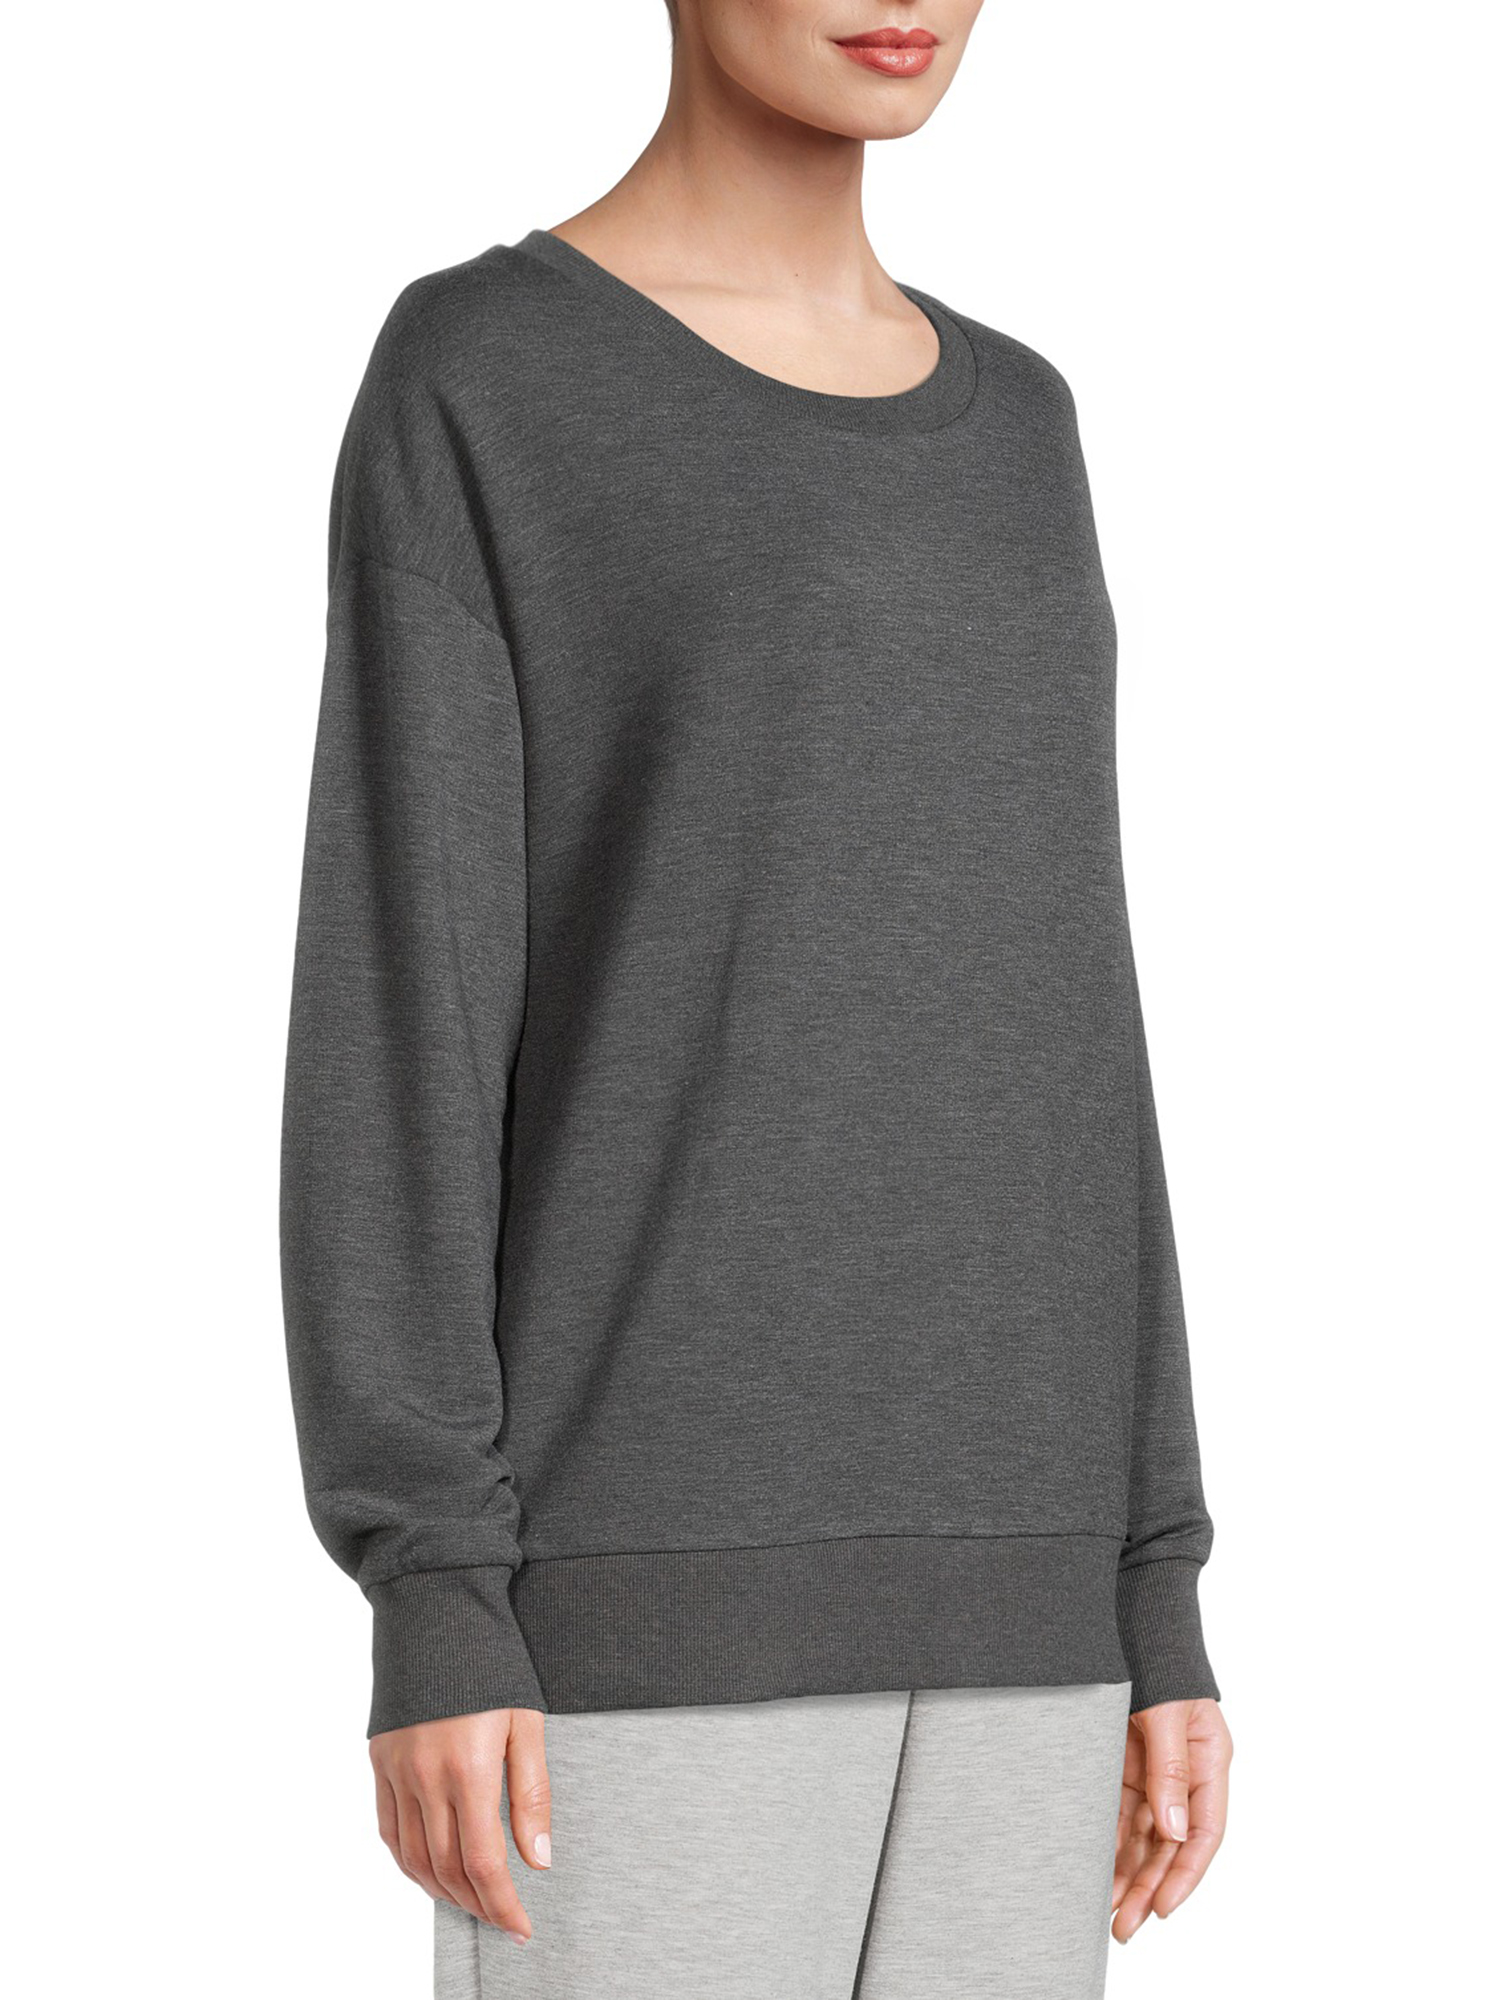 Reebok Long Sleeve Pullover Relaxed Fit Sweatshirt (Women's) 1 Pack - image 5 of 6